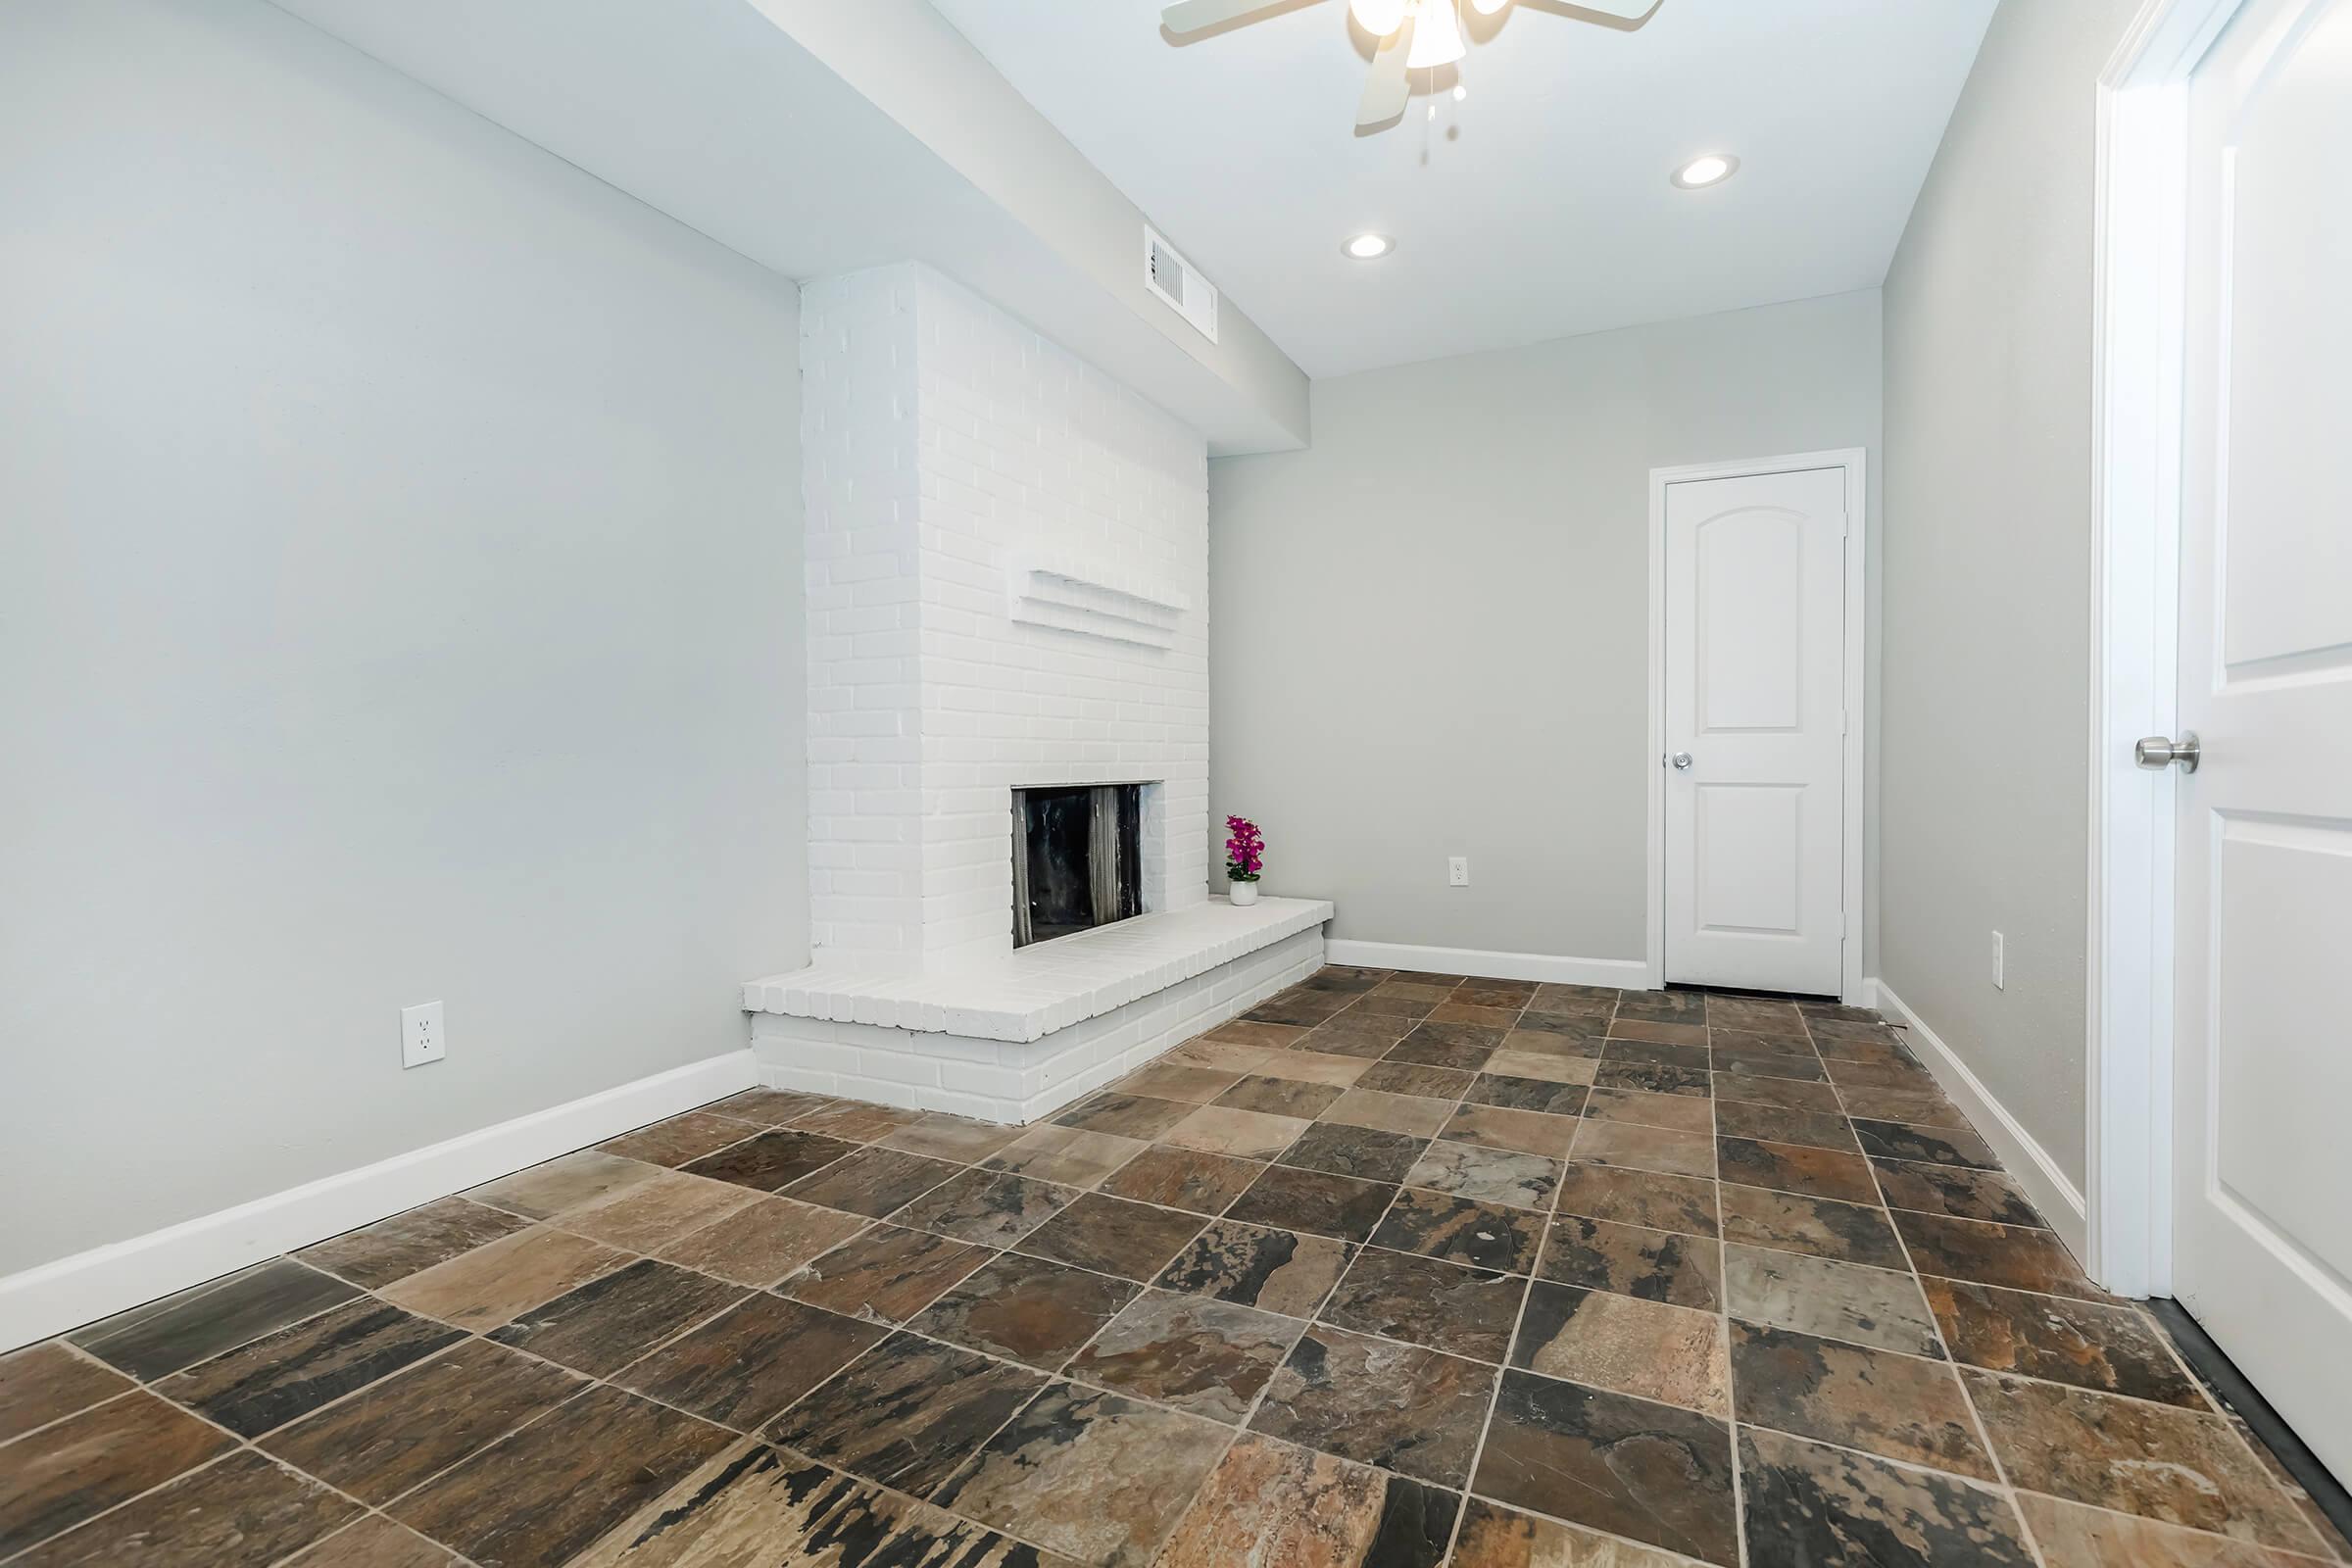 BEAUTIFUL FLOORING AND FIREPLACE IN HOUSTON, TX